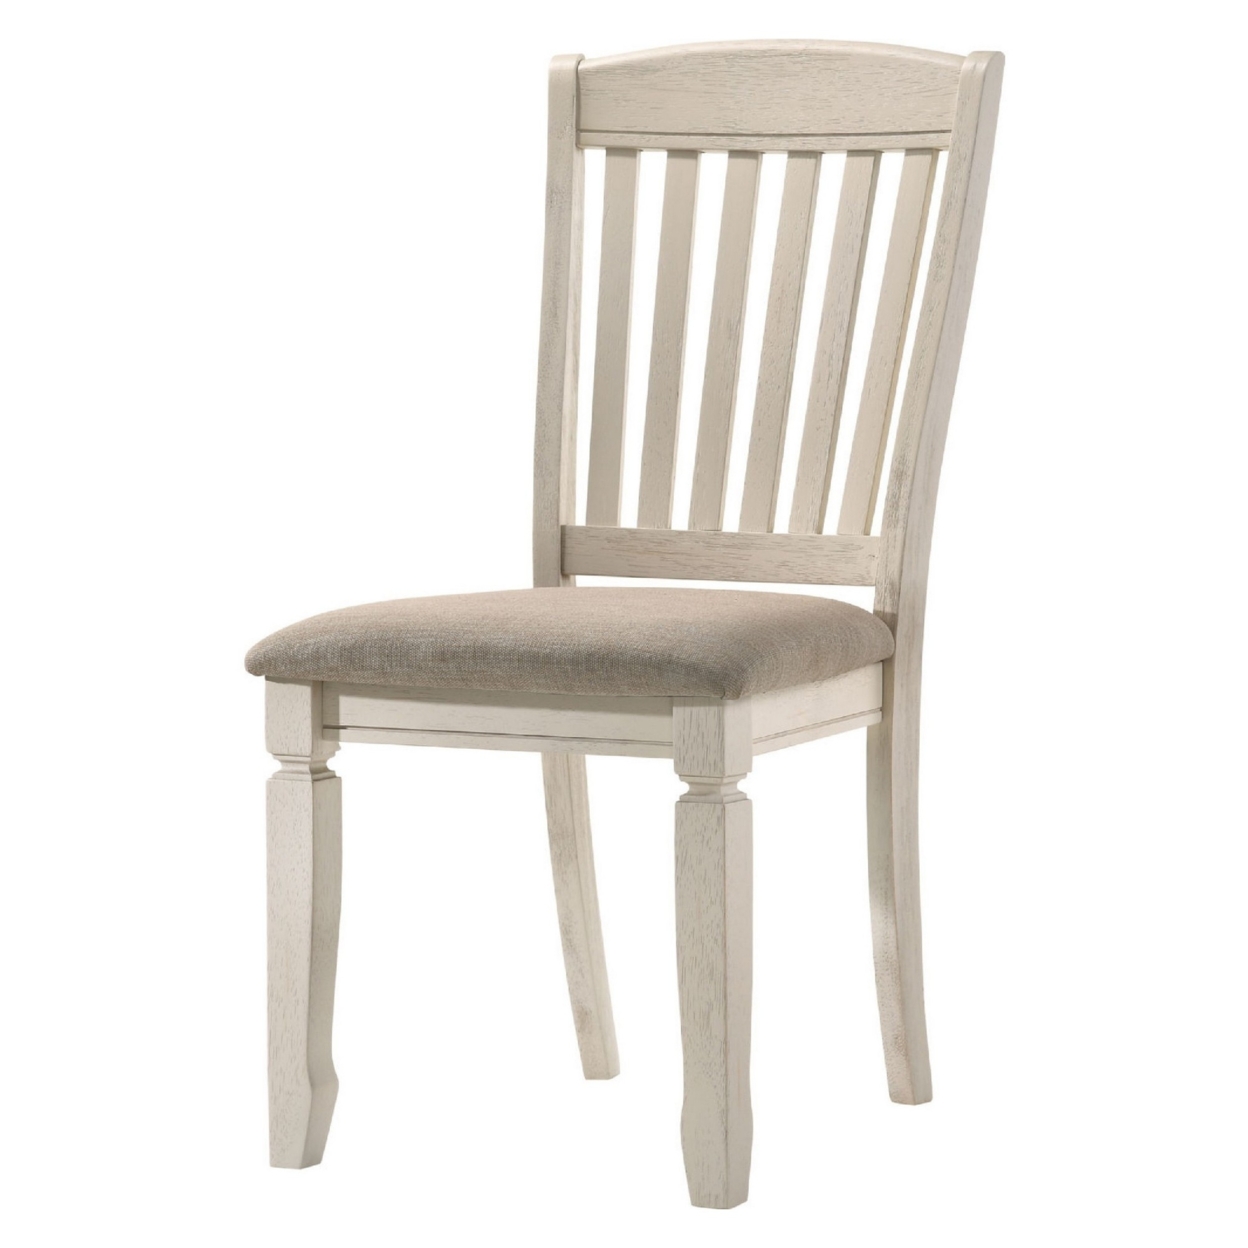 18 Inch Dining Chair, Fabric Padded Seat, Slatted, Set Of 2, Antique White- Saltoro Sherpi